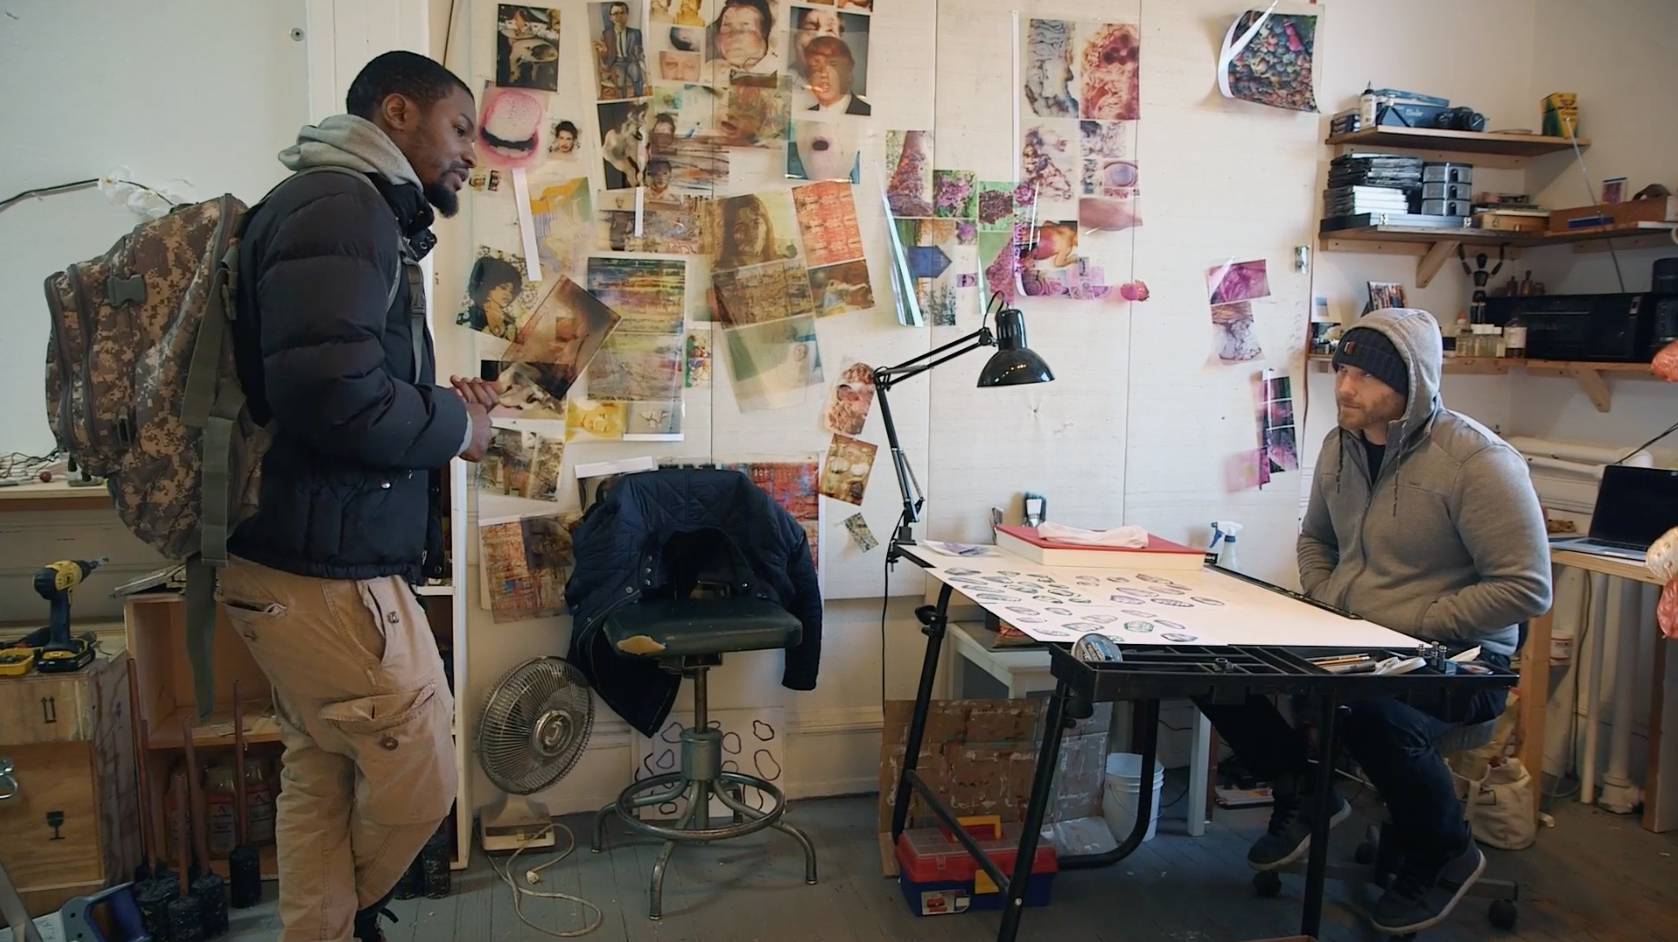 Artists Jesse Krimes and Russell Craig in a still from the feature documentary "Art & Krimes by Krimes" directed by Alysa Nahmias